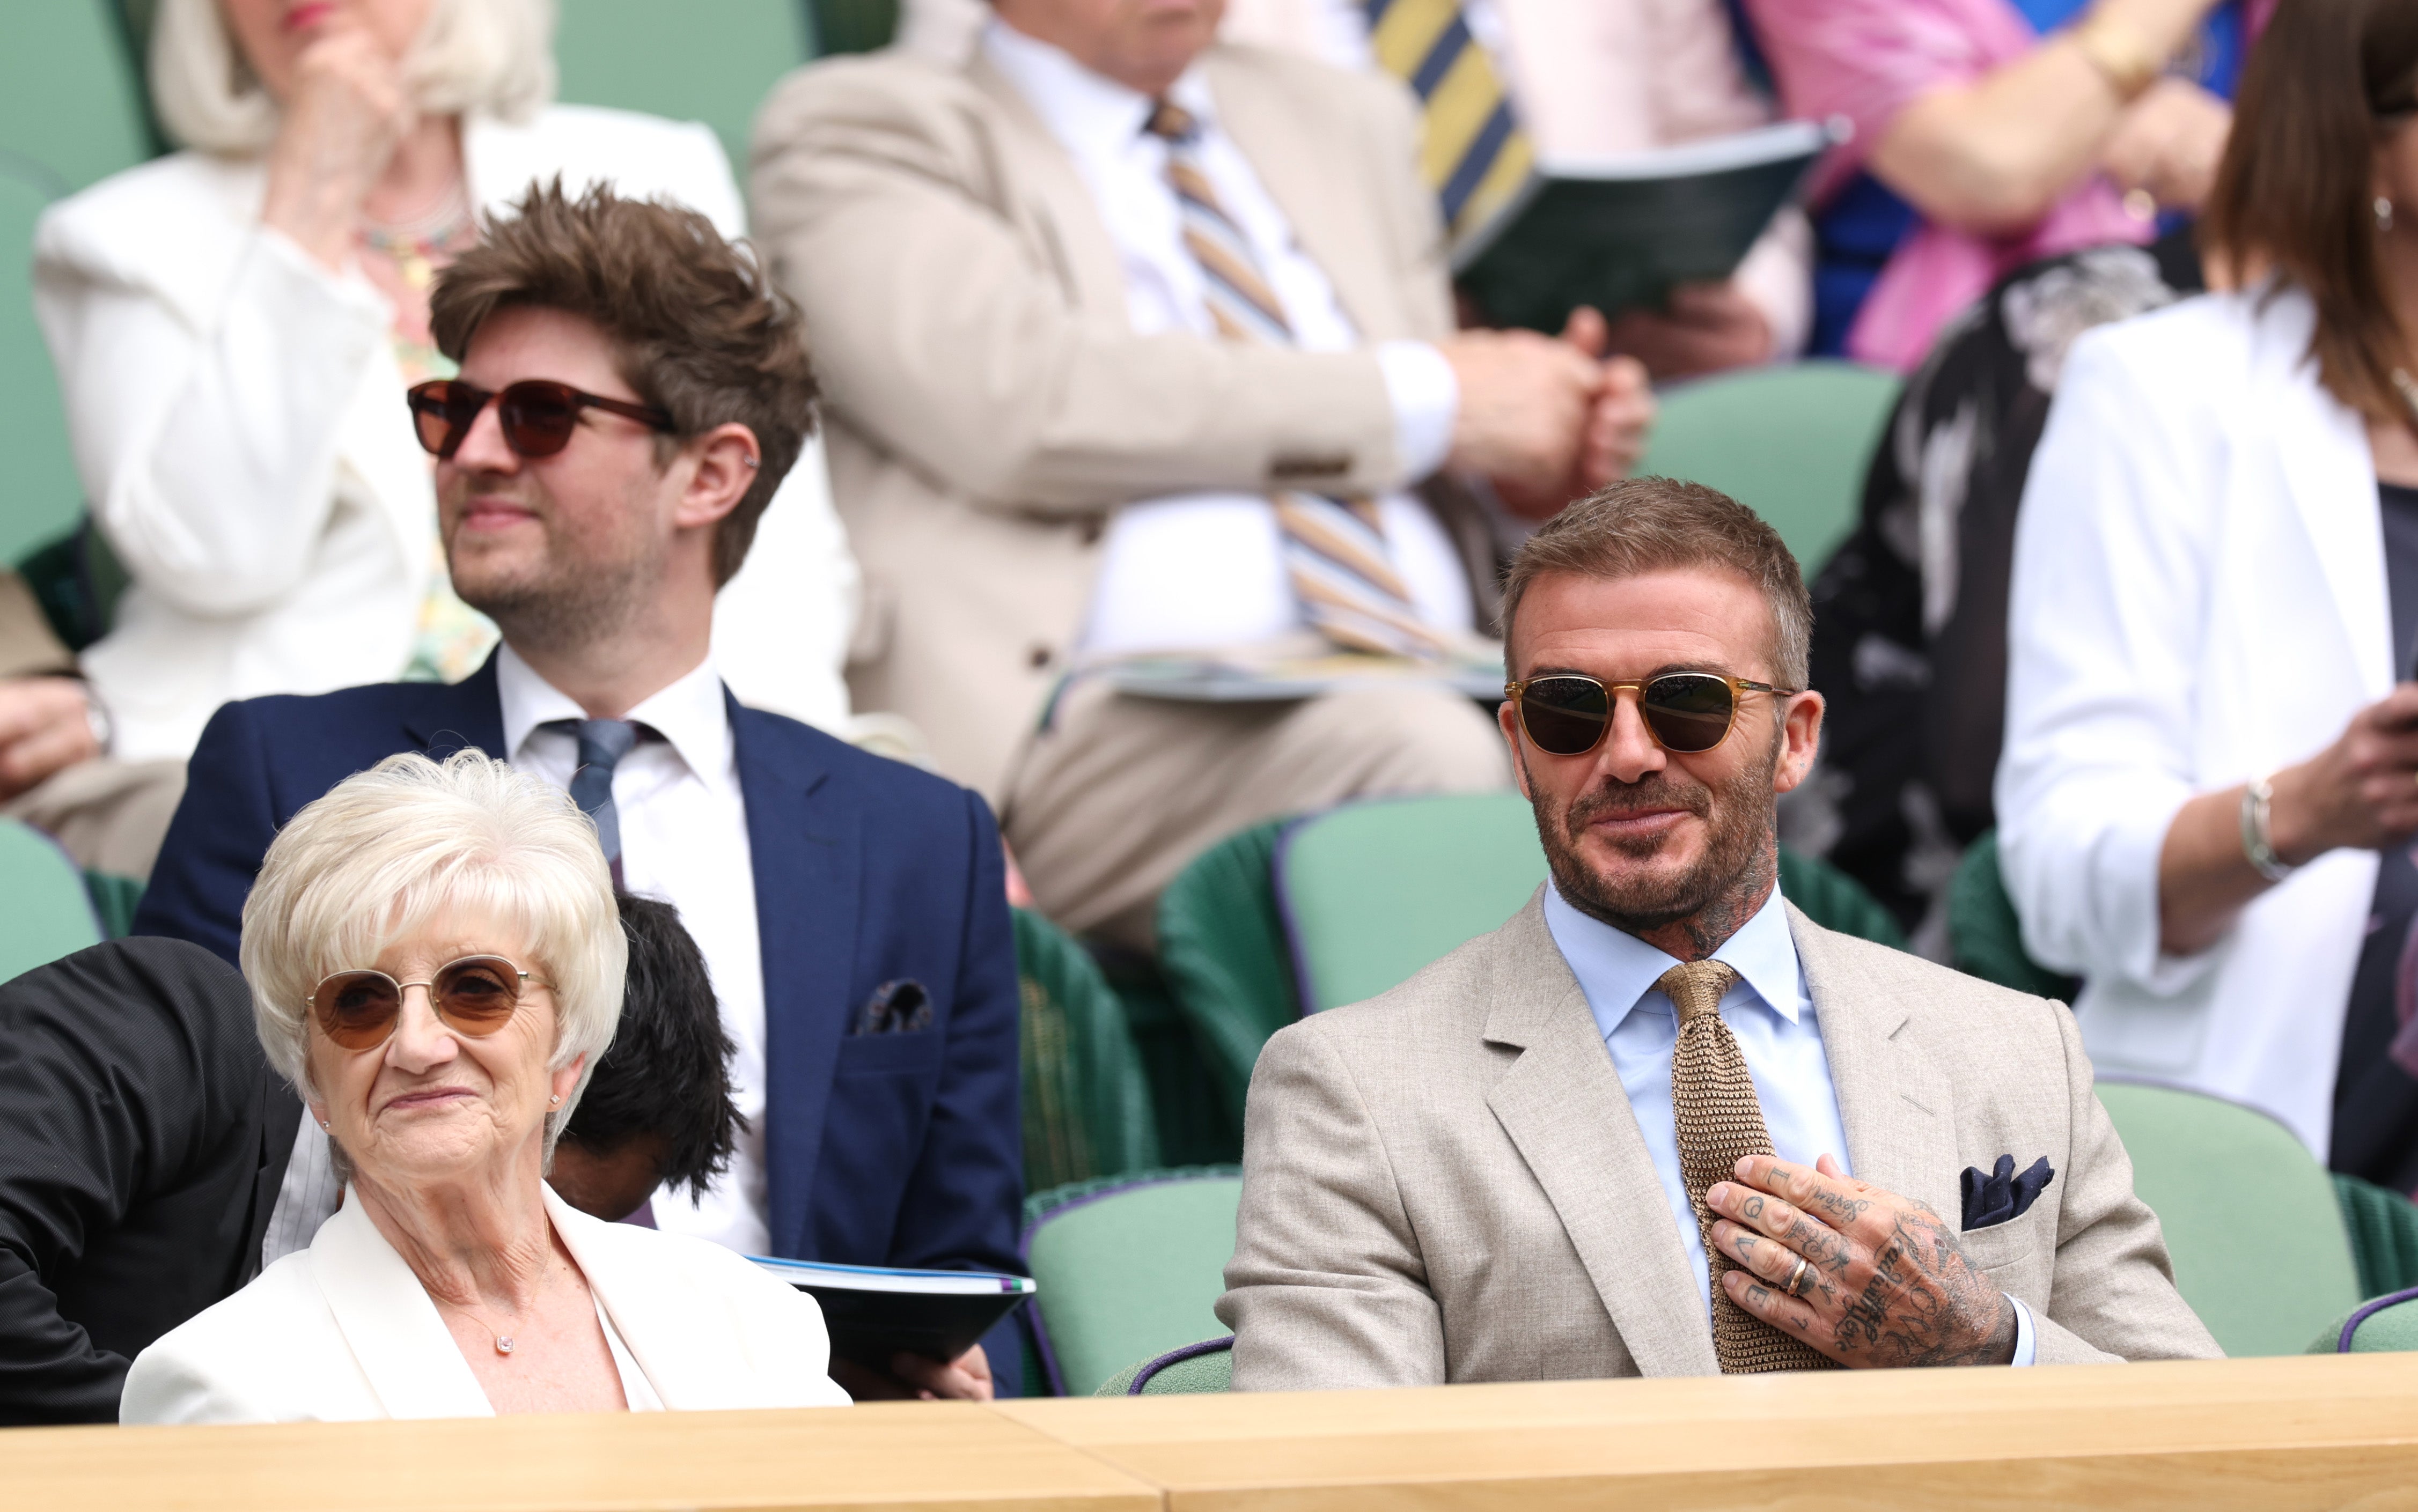 David and Sandra Beckham ahead of the Gentlemen's Singles first round match between Carlos Alcaraz of Spain and Dusan Lajovic of Serbia during day one